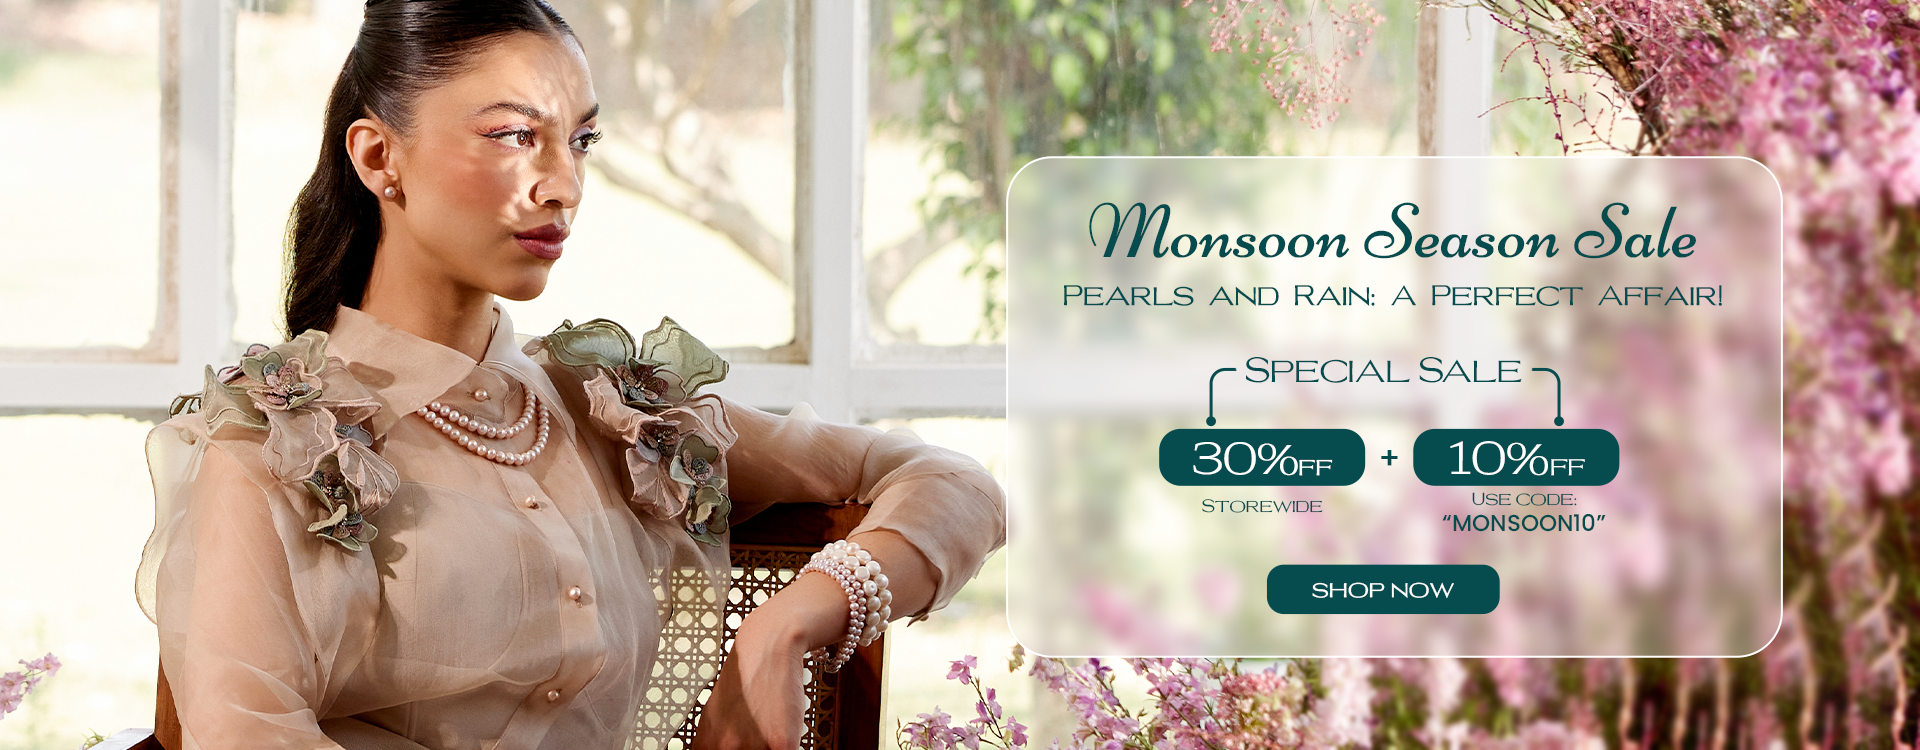 Monsoon Sale: Save Extra 10% on Exclusive Pearl Jewelries